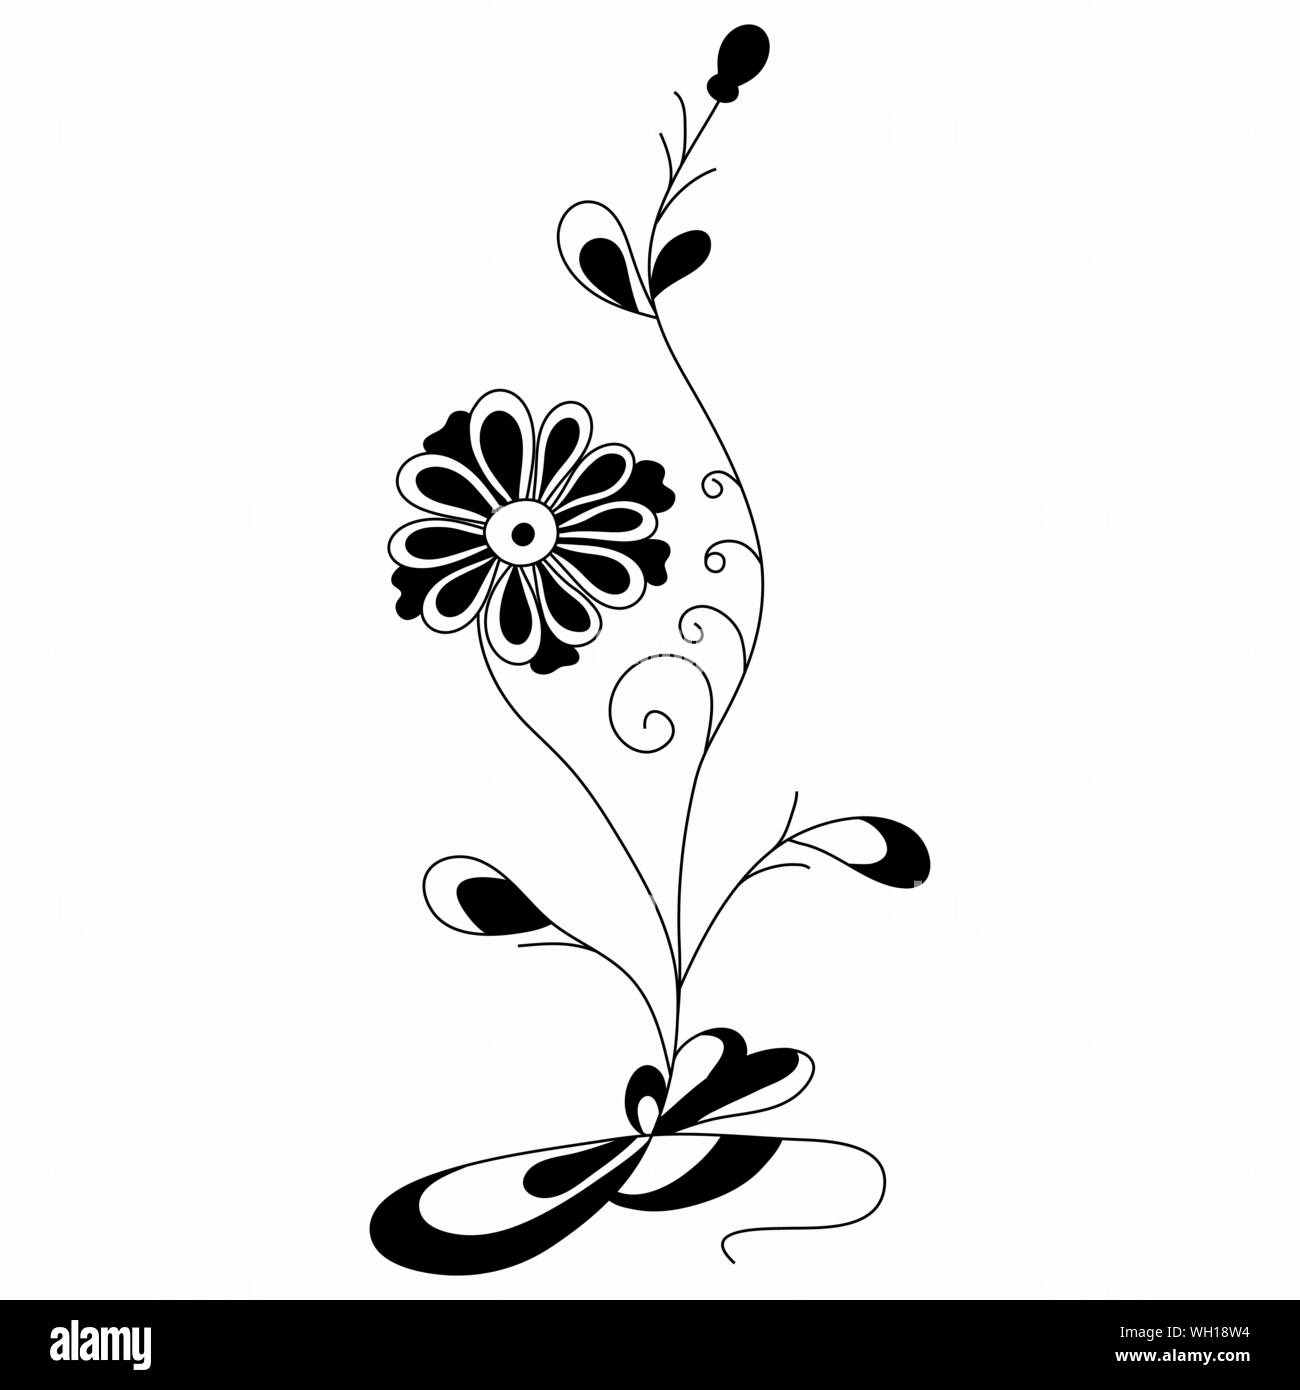 Flower abstract vector illustration of a classic style on a white background Stock Vector